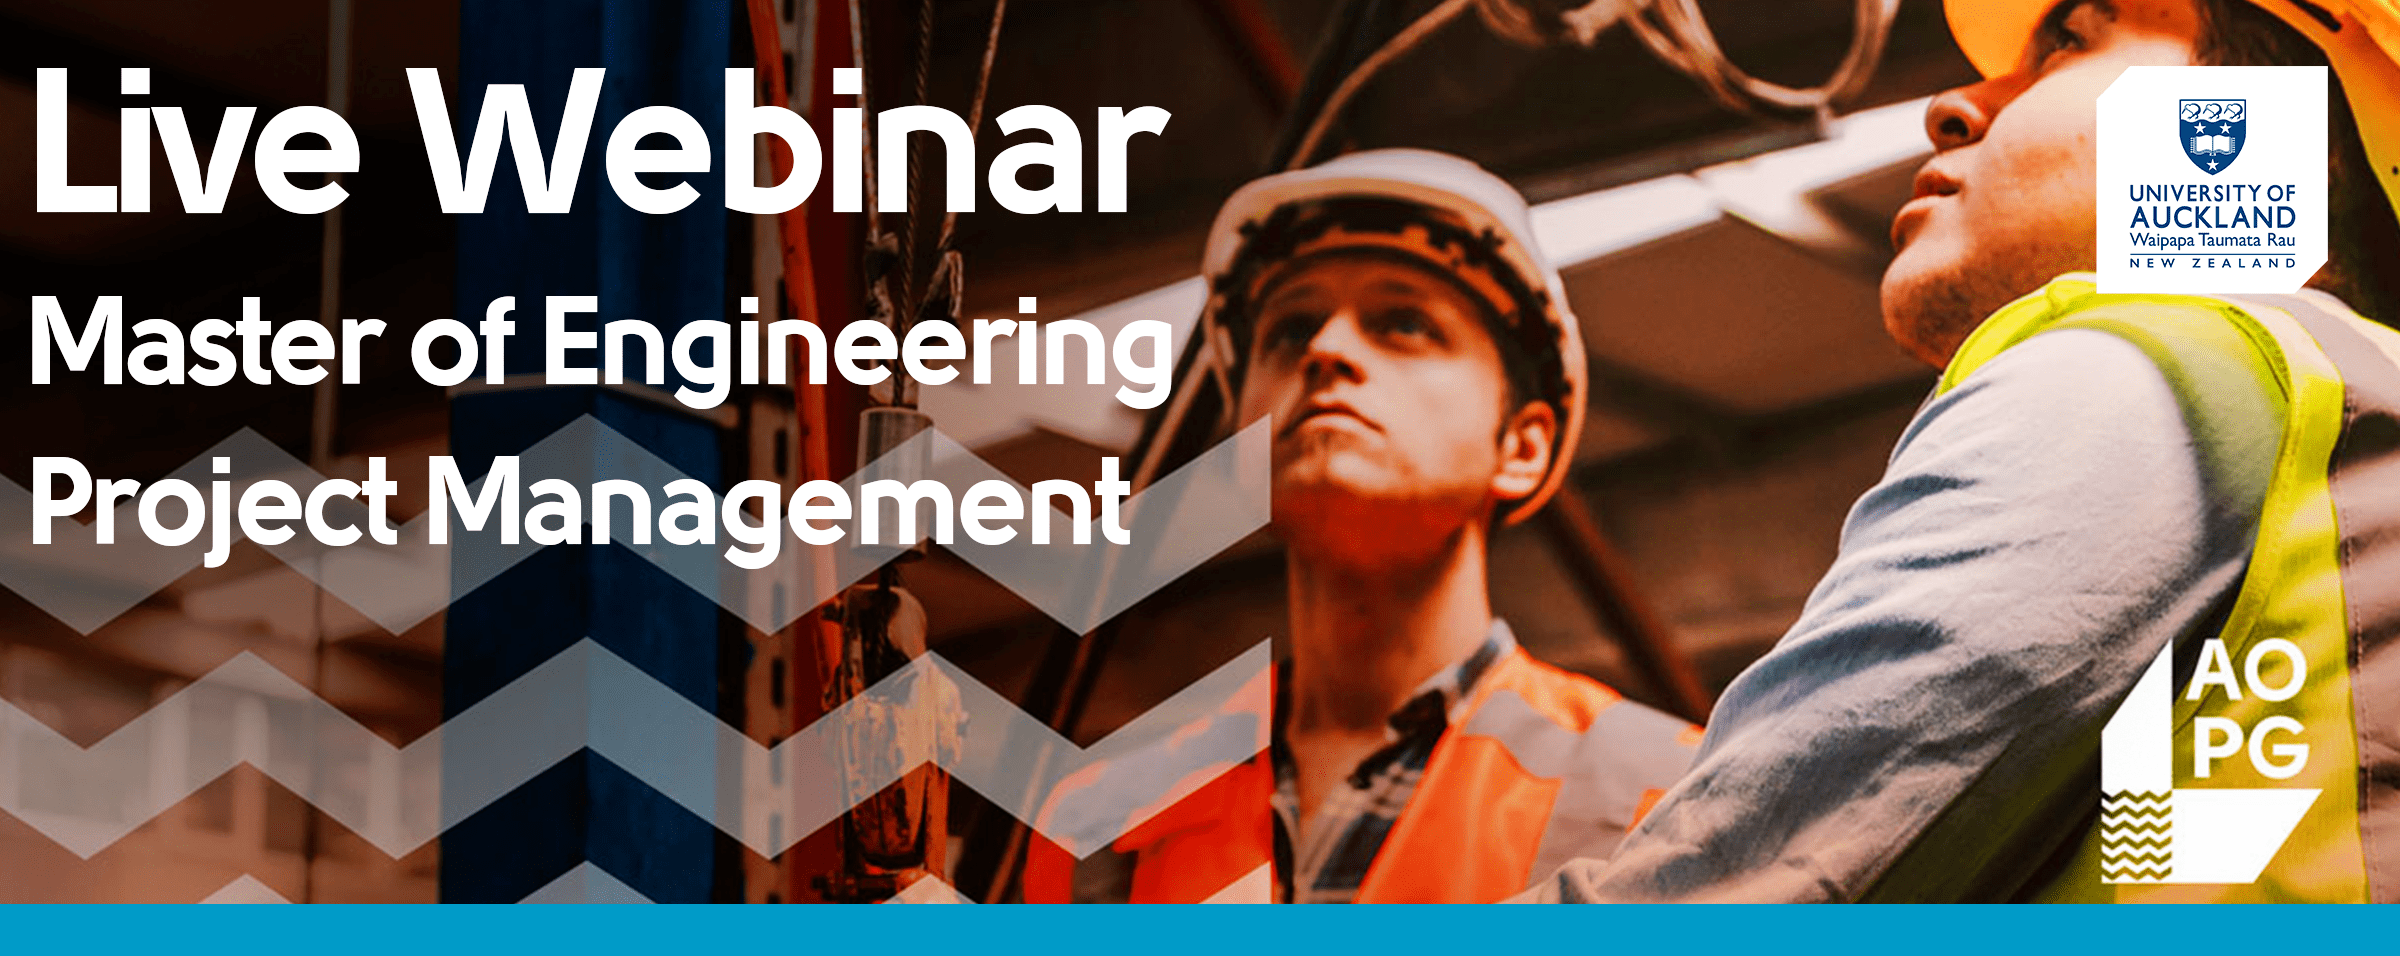 All you need to know about studying the Master of Engineering Project Management